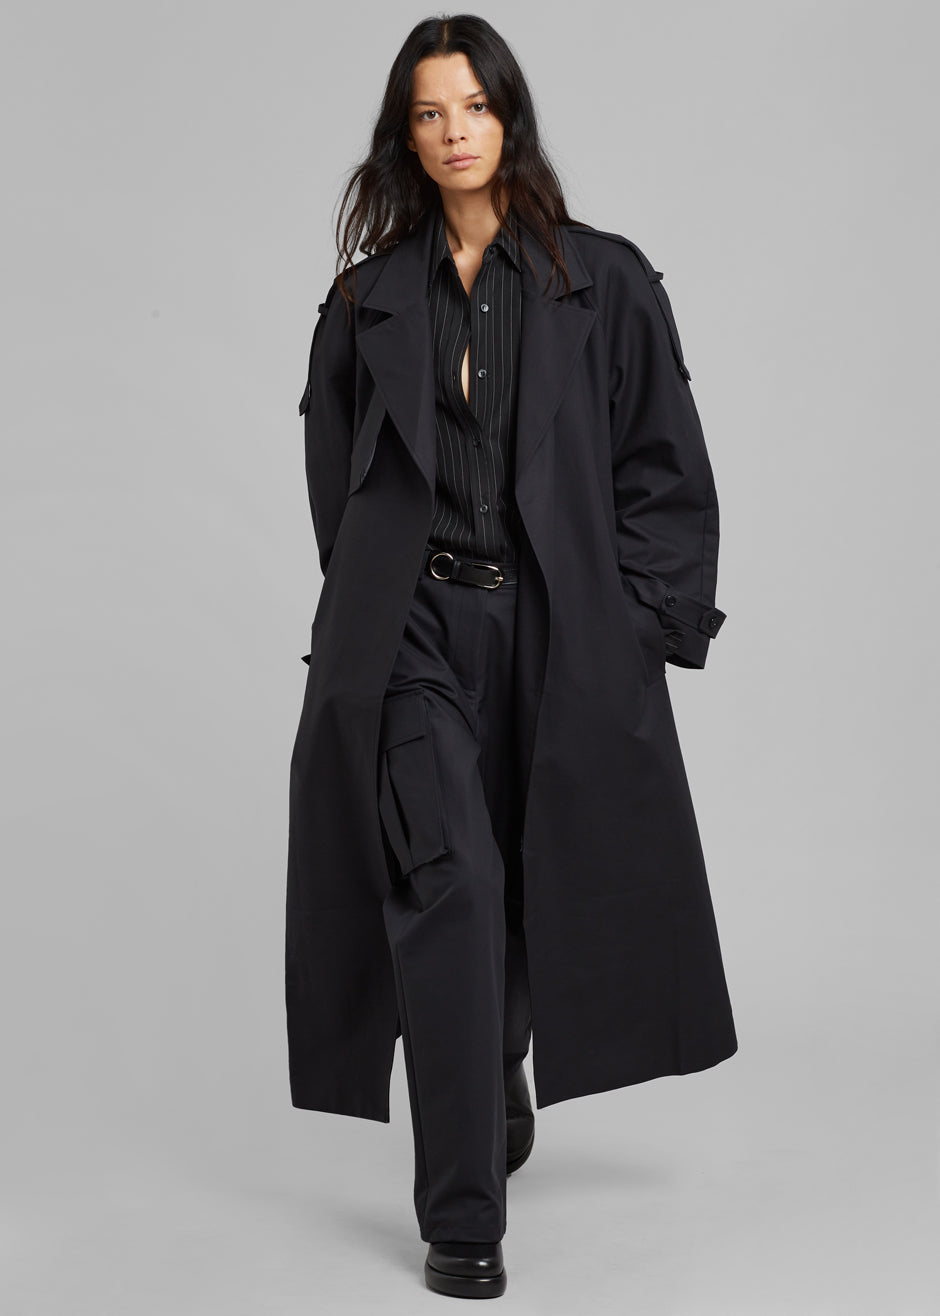 Suzanne Trench Coat - Black - 2